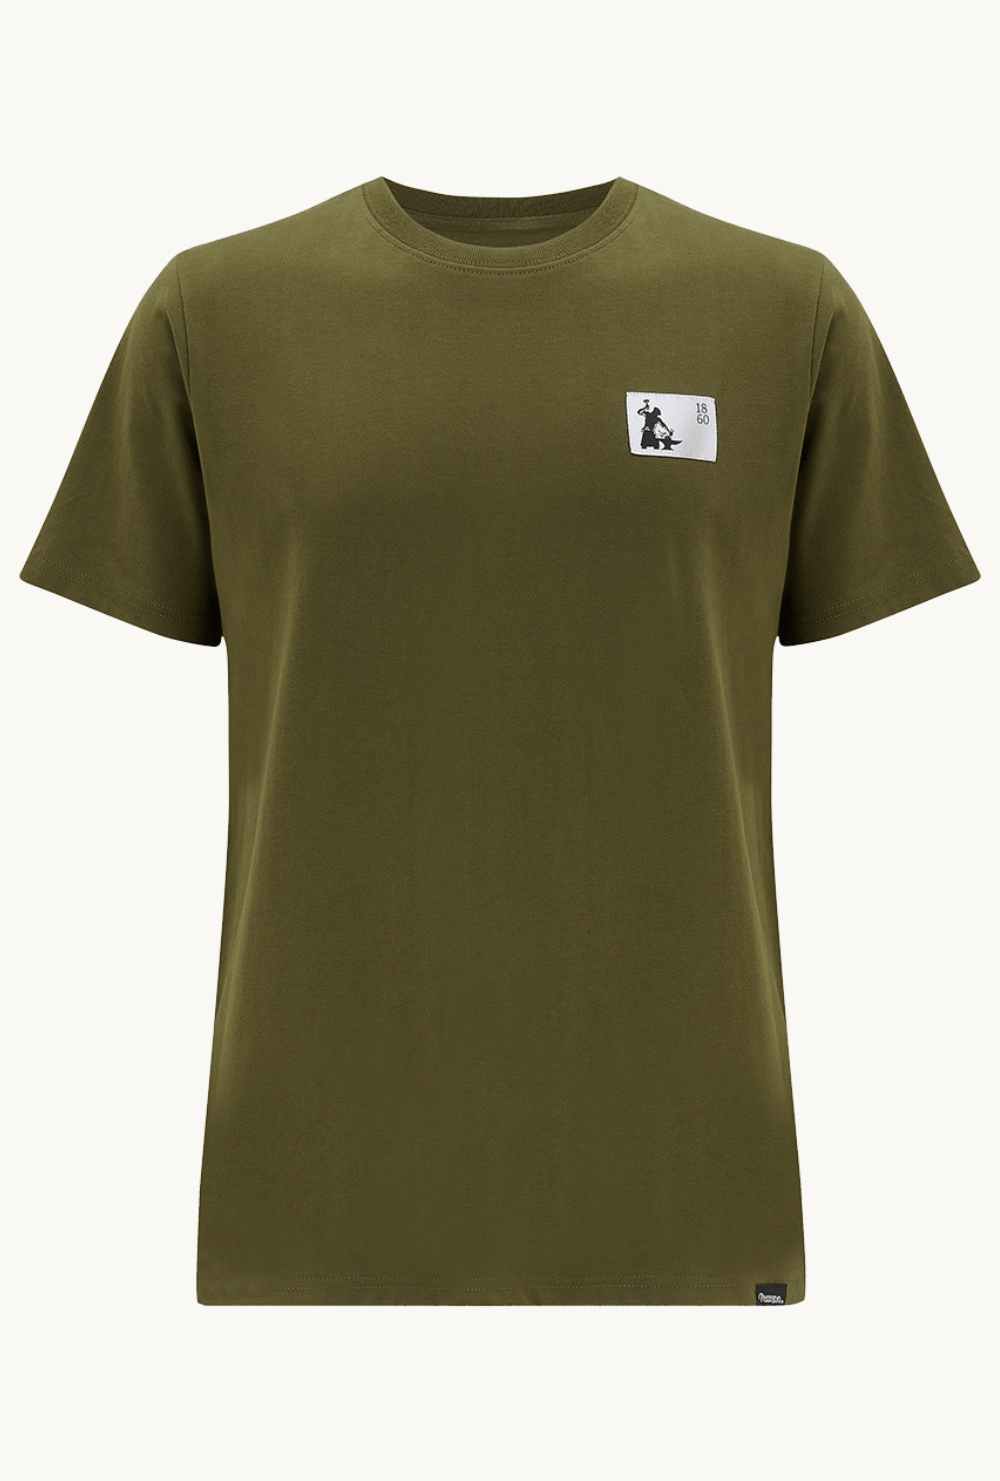 Pearson 1860  Put The Hammer Down - 100% Organic Cotton Unisex Cycling T-shirt Olive  Small / Olive